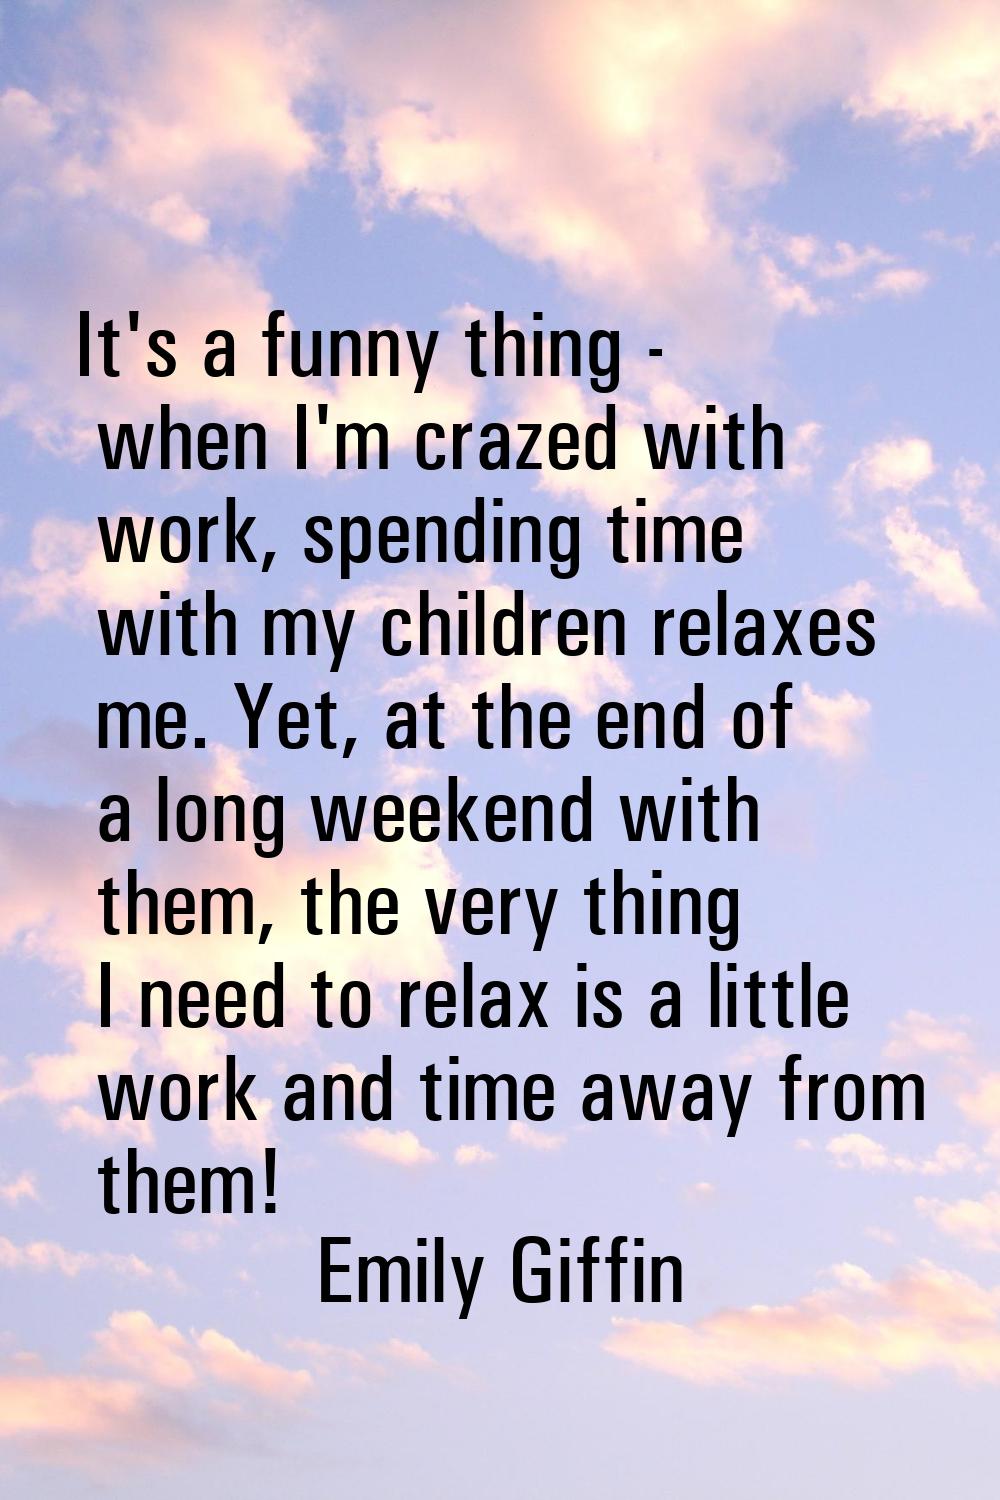 It's a funny thing - when I'm crazed with work, spending time with my children relaxes me. Yet, at 